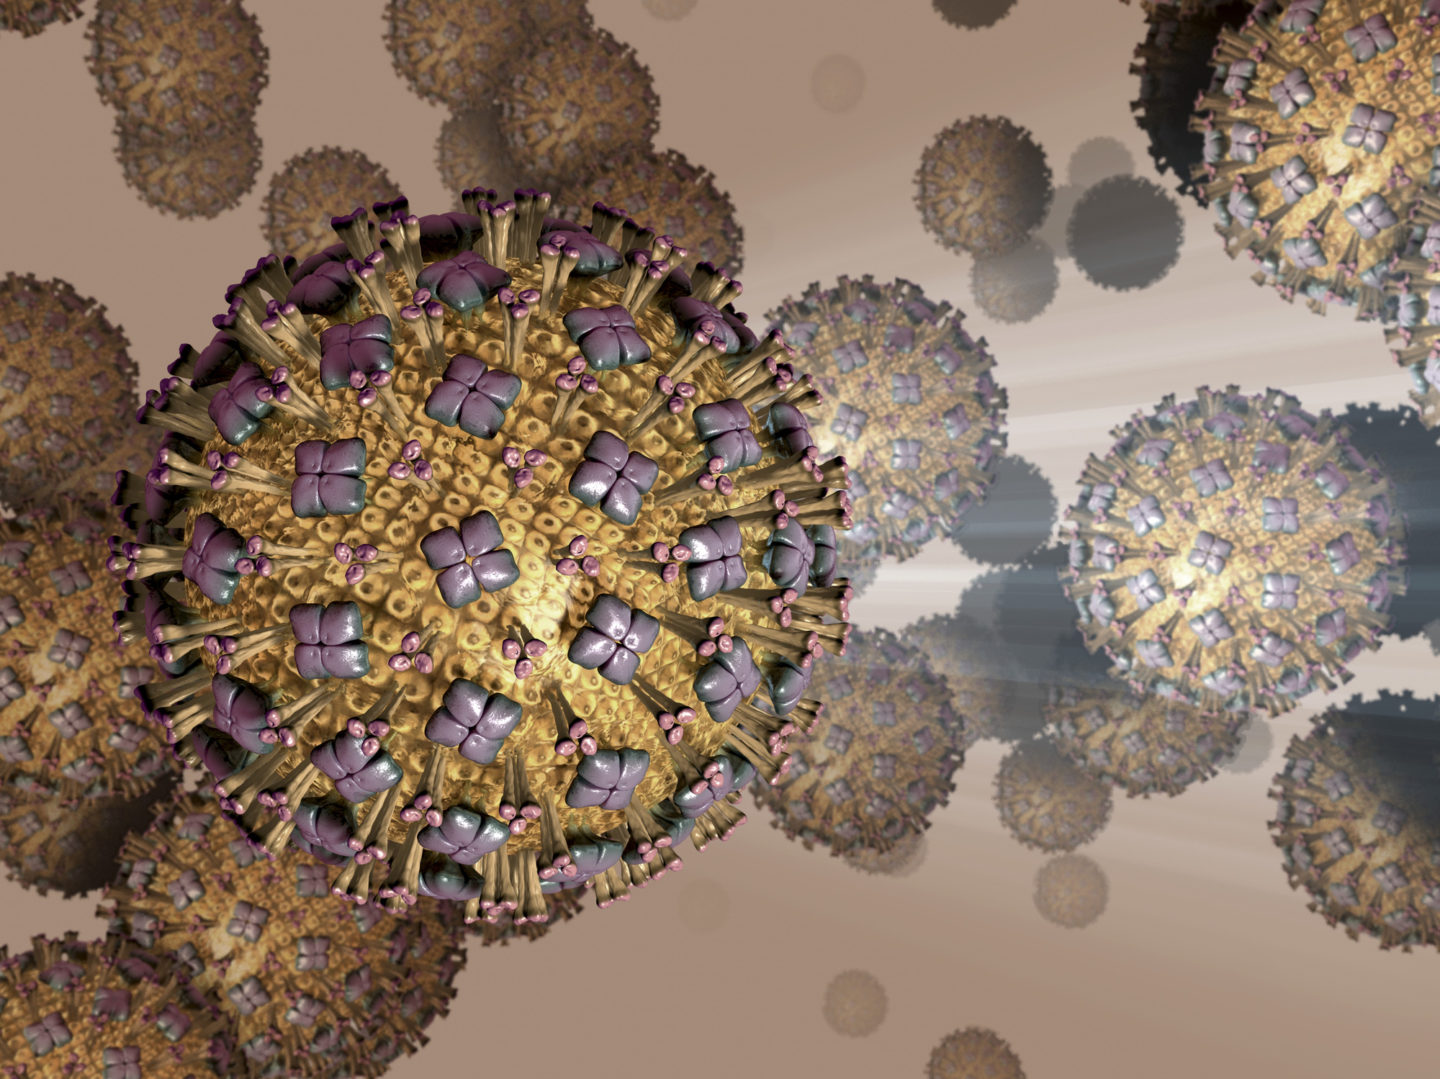 Animated view of viruses